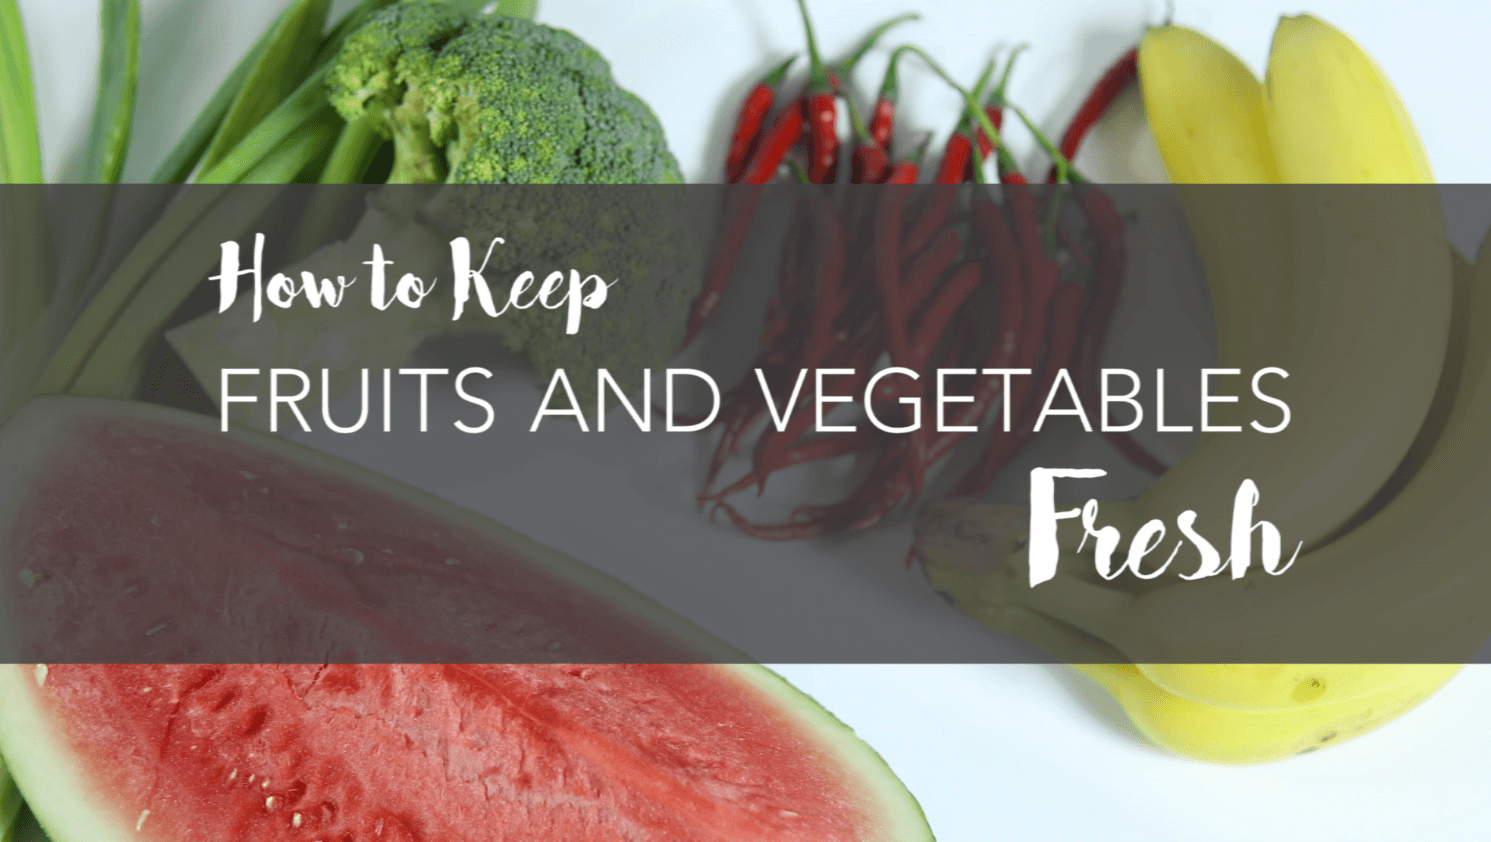 How to Keep Fruits and Vegetables Fresh!